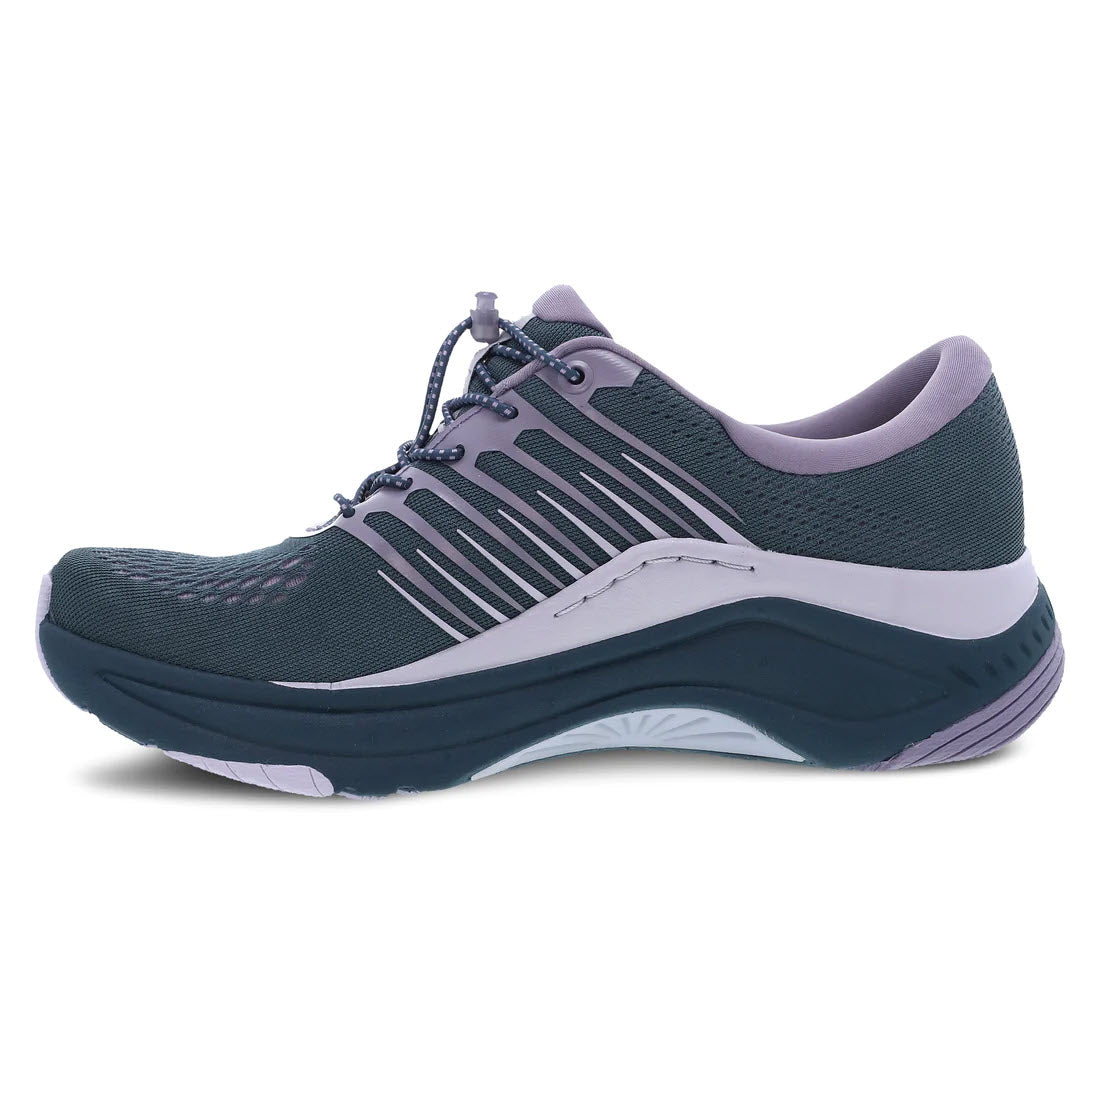 Side view of a dark and light purple Dansko DANSKO PENNI DENIM MESH - WOMENS athletic shoe with a mesh upper, lace-up closure, and thick sole; features Dansko Natural Arch Plus™ technology for added support.